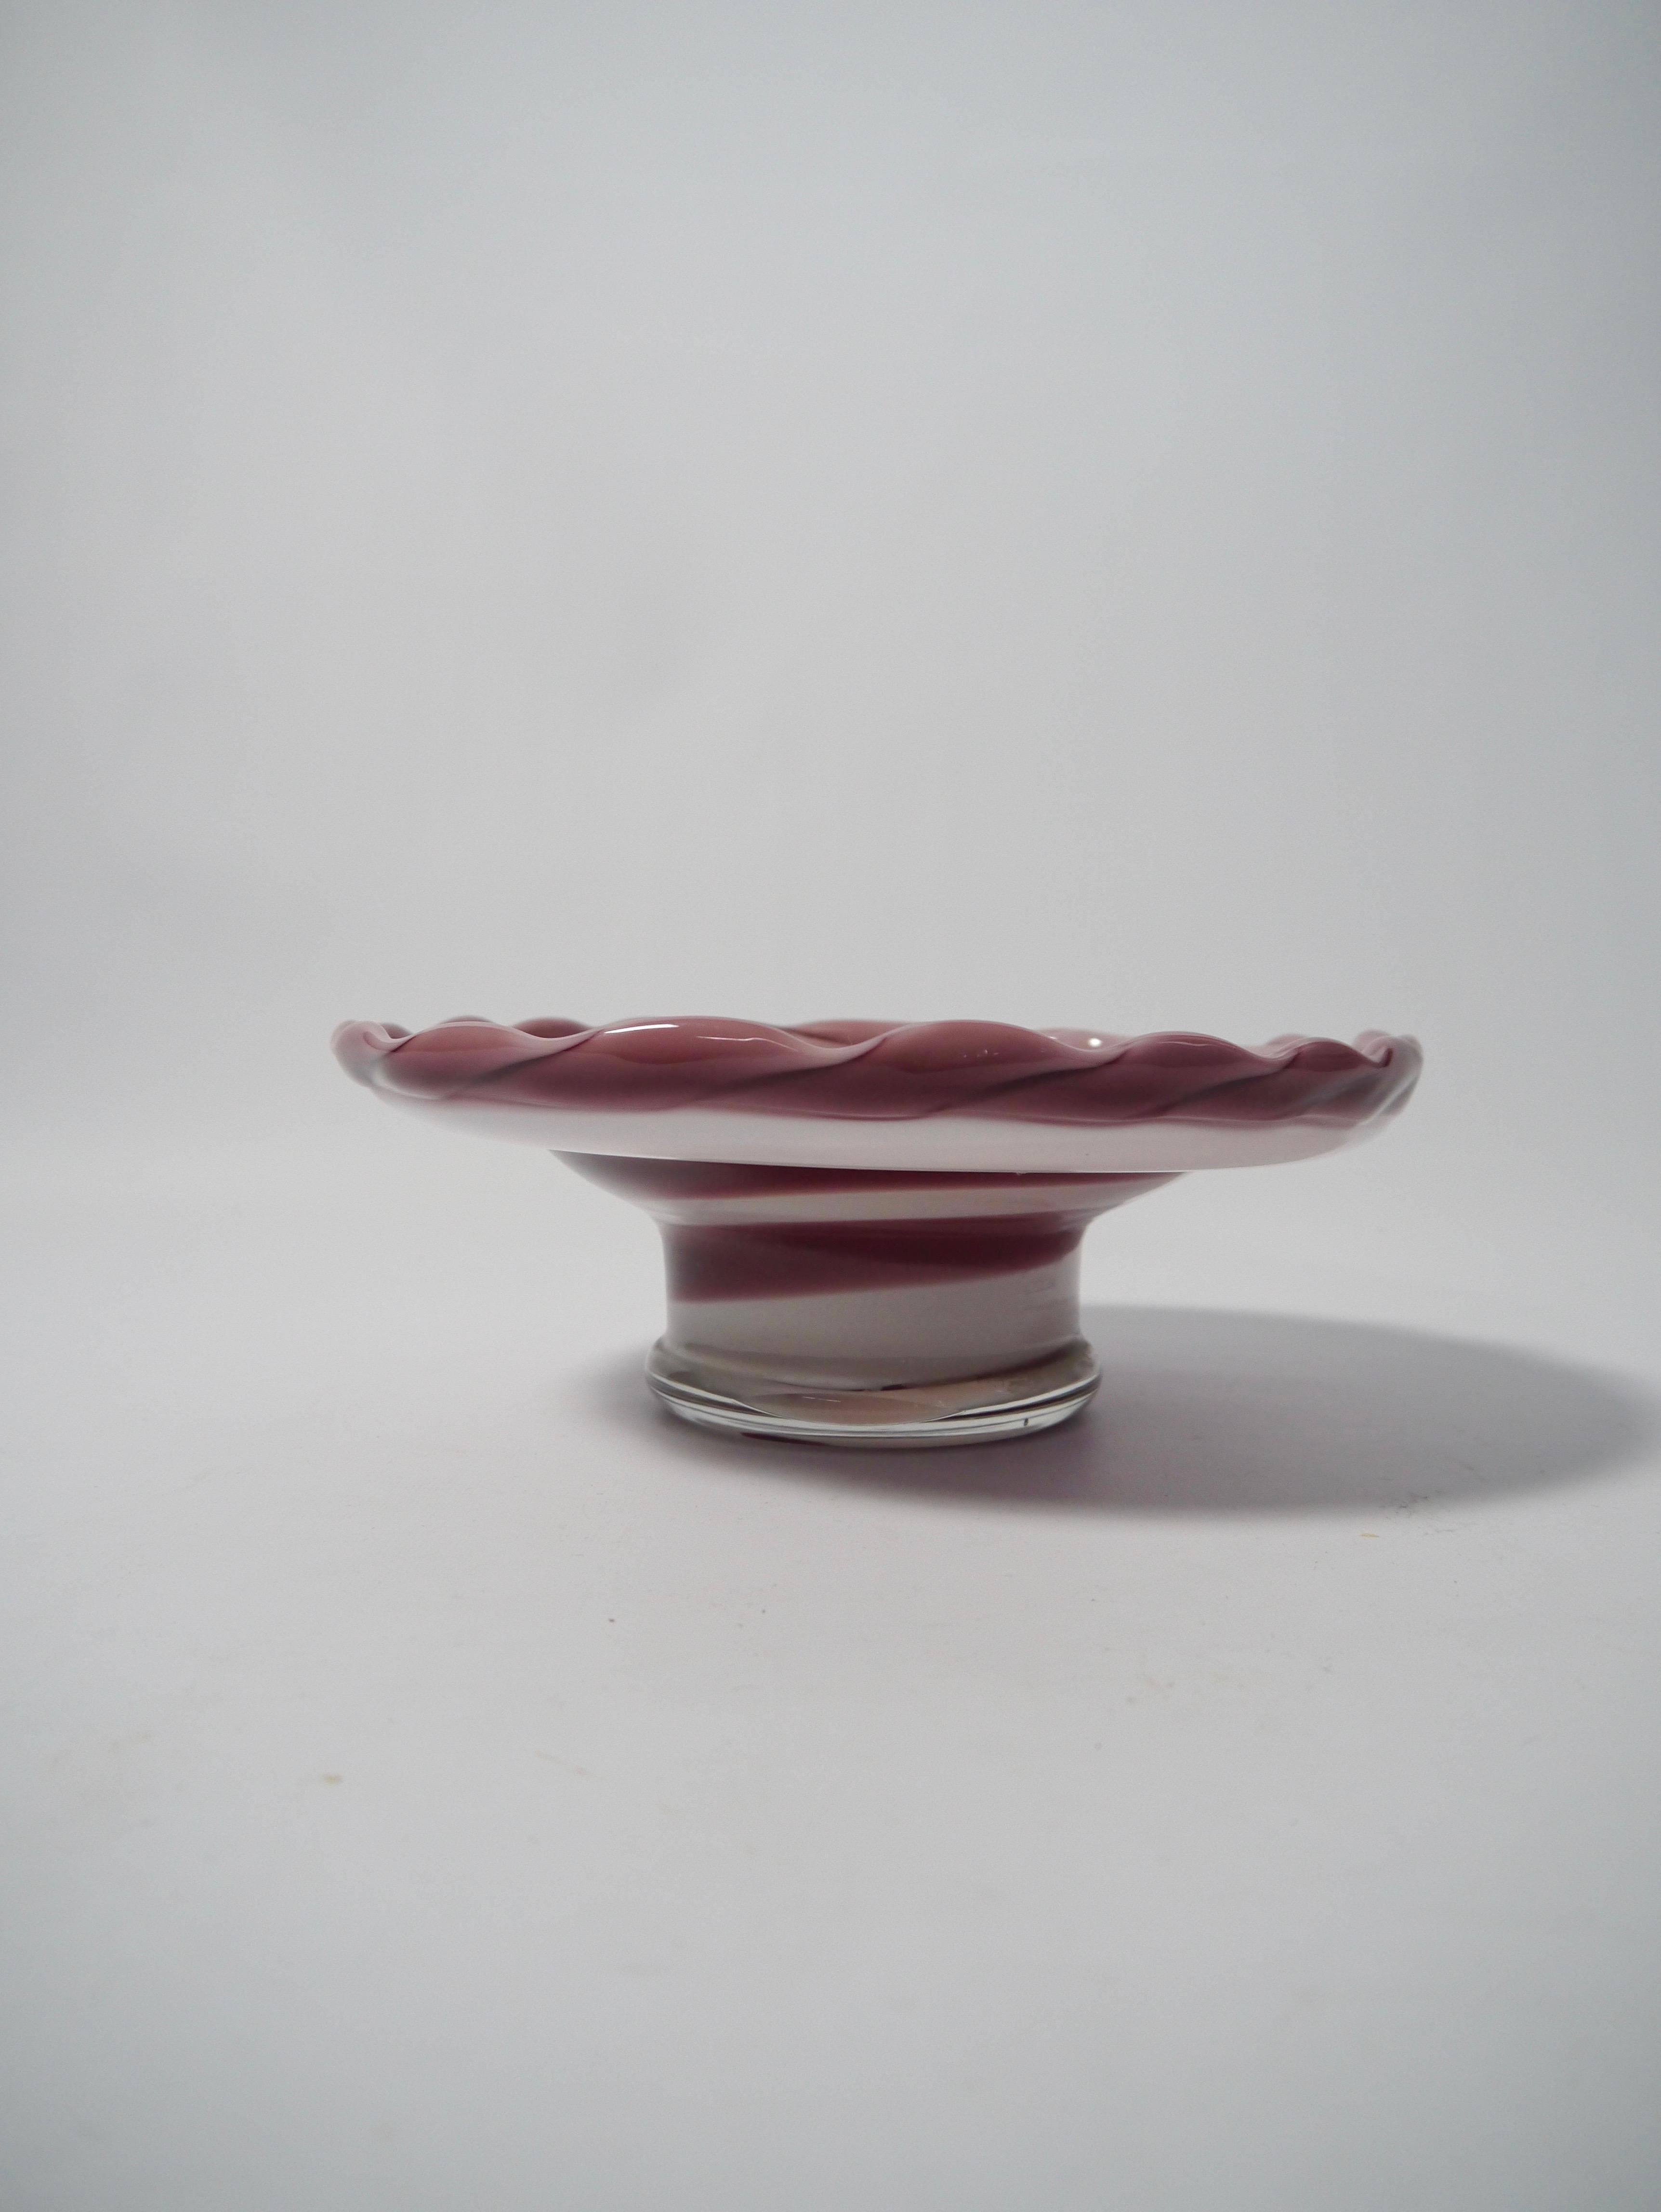 Soft pink murano glass dish / centerpiece, made in Italy 1950s.